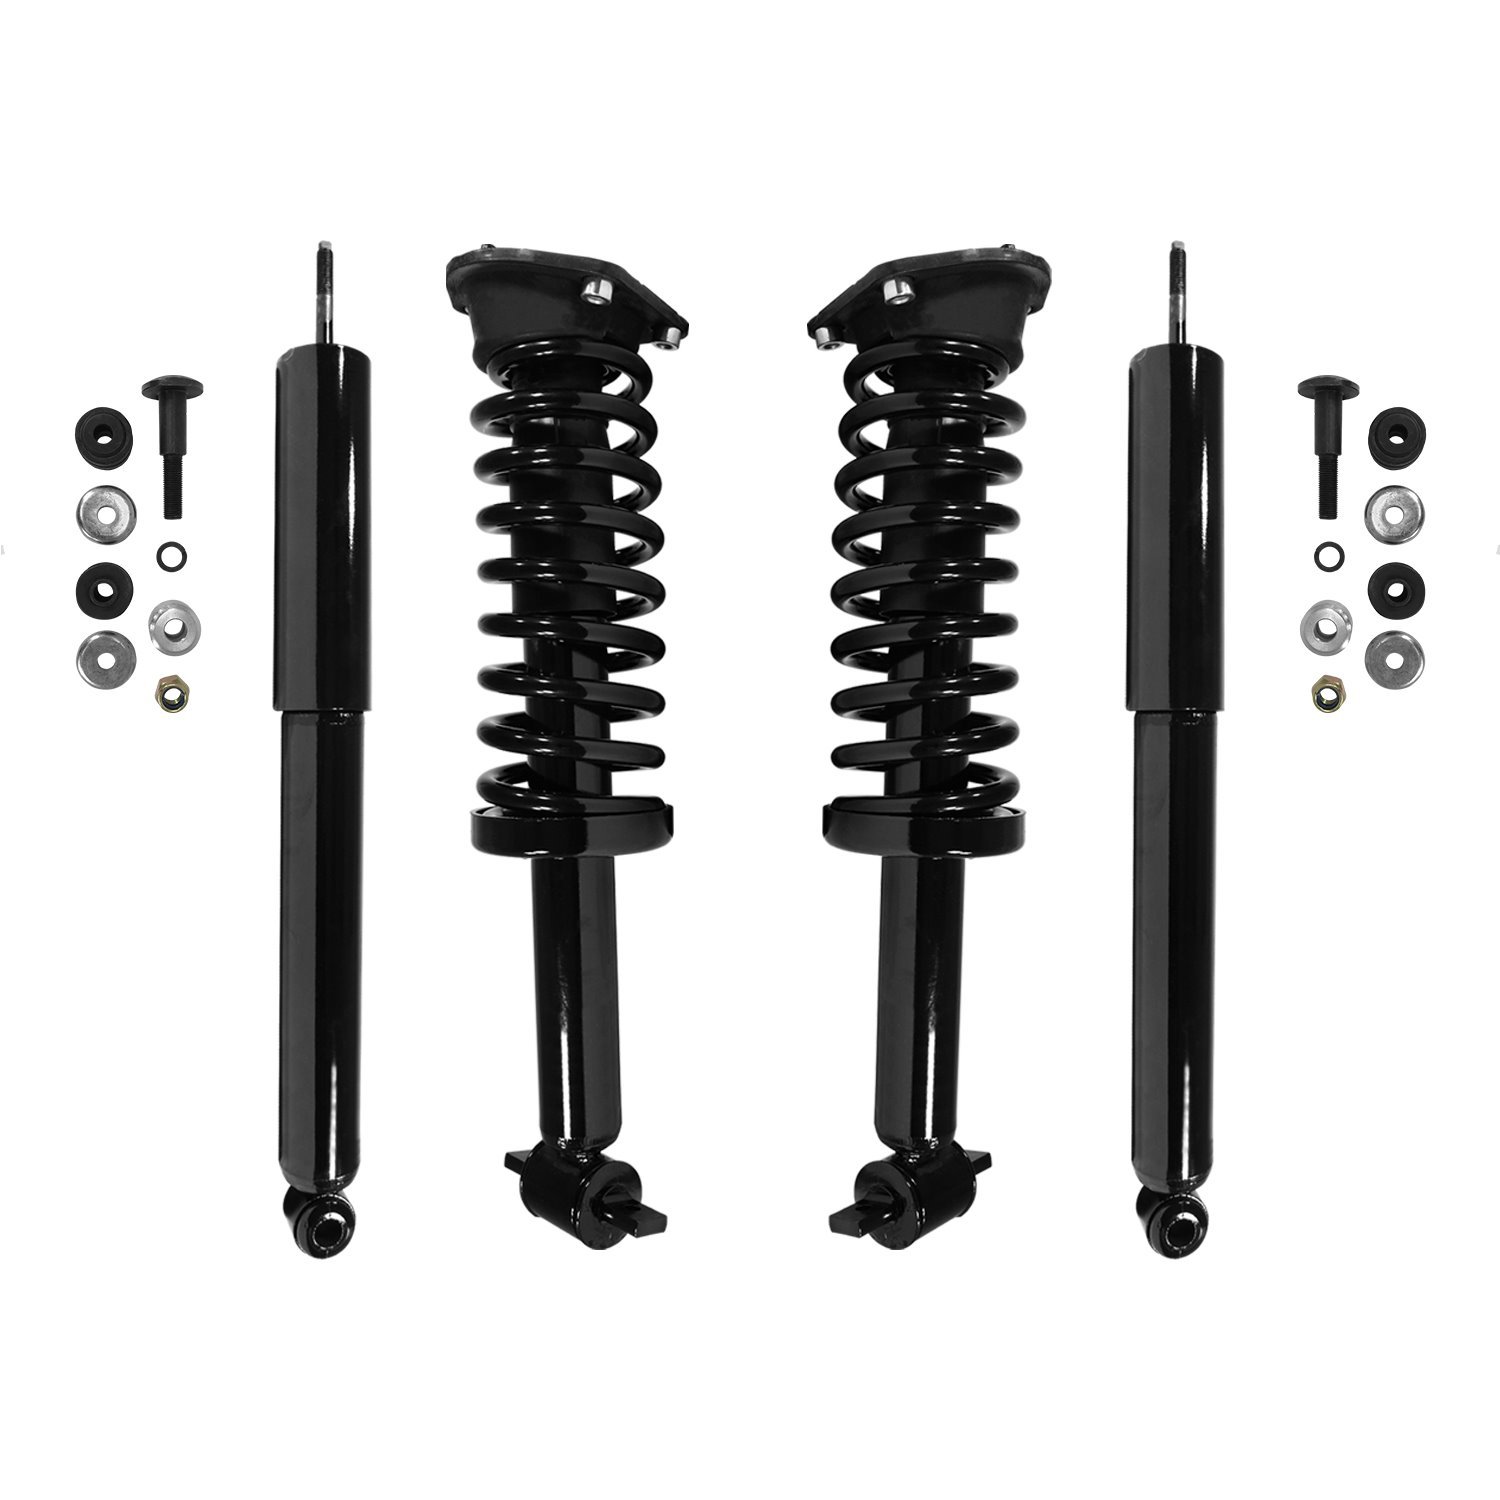 4-11993-253610-001 Front & Rear Suspension Strut & Coil Spring Assembly Fits Select GM